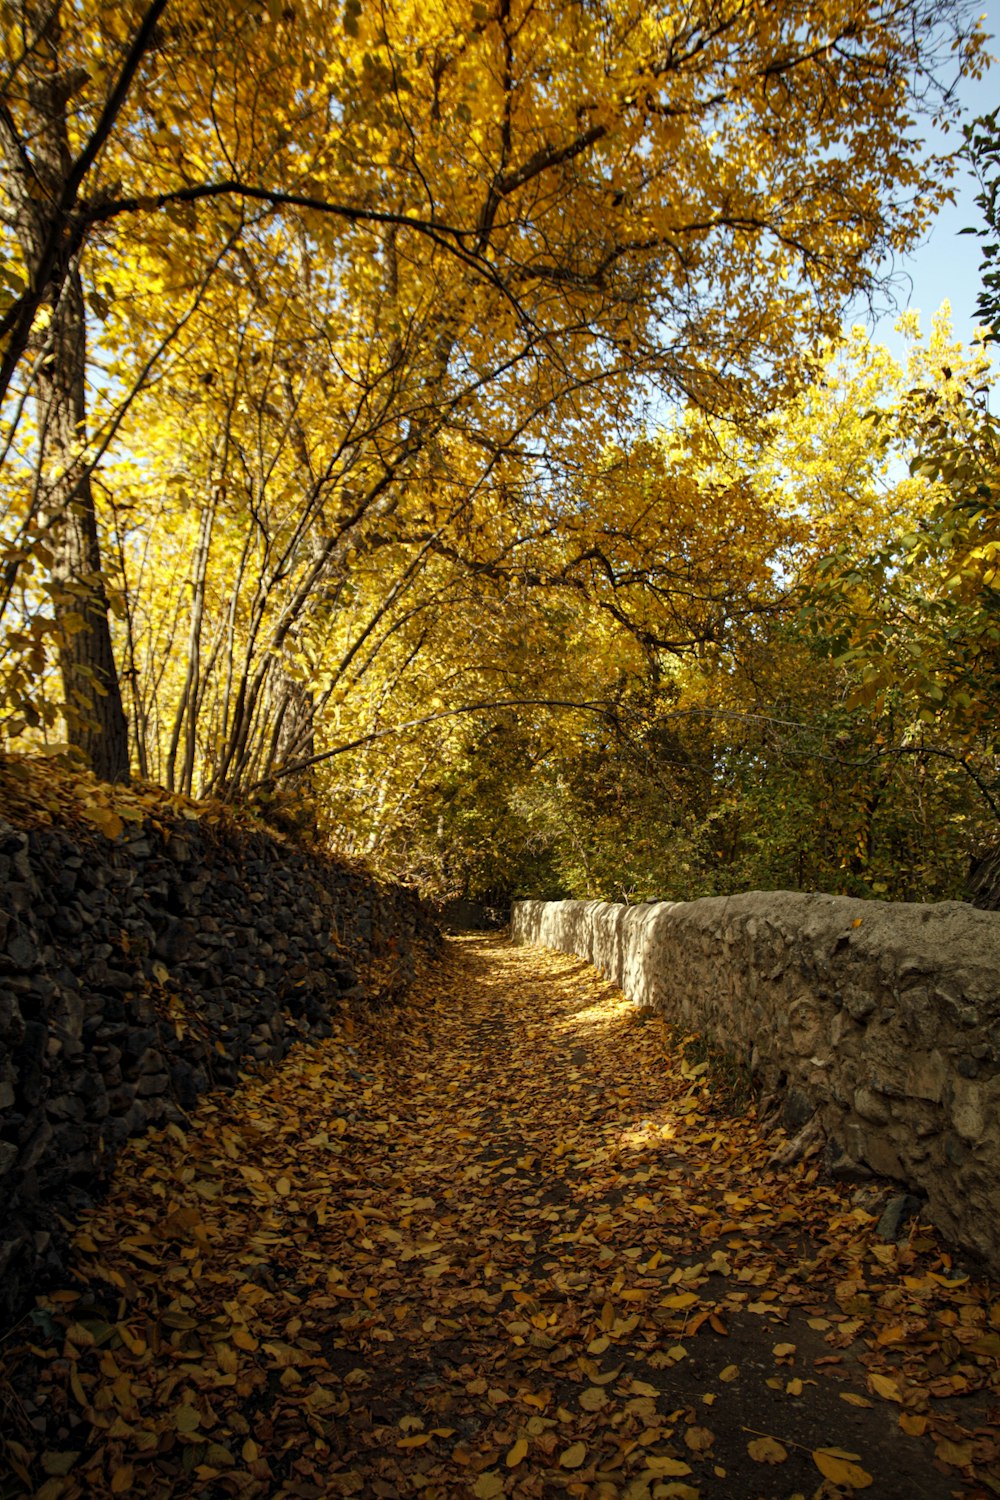 a dirt road with a stone wall and trees with yellow leaves